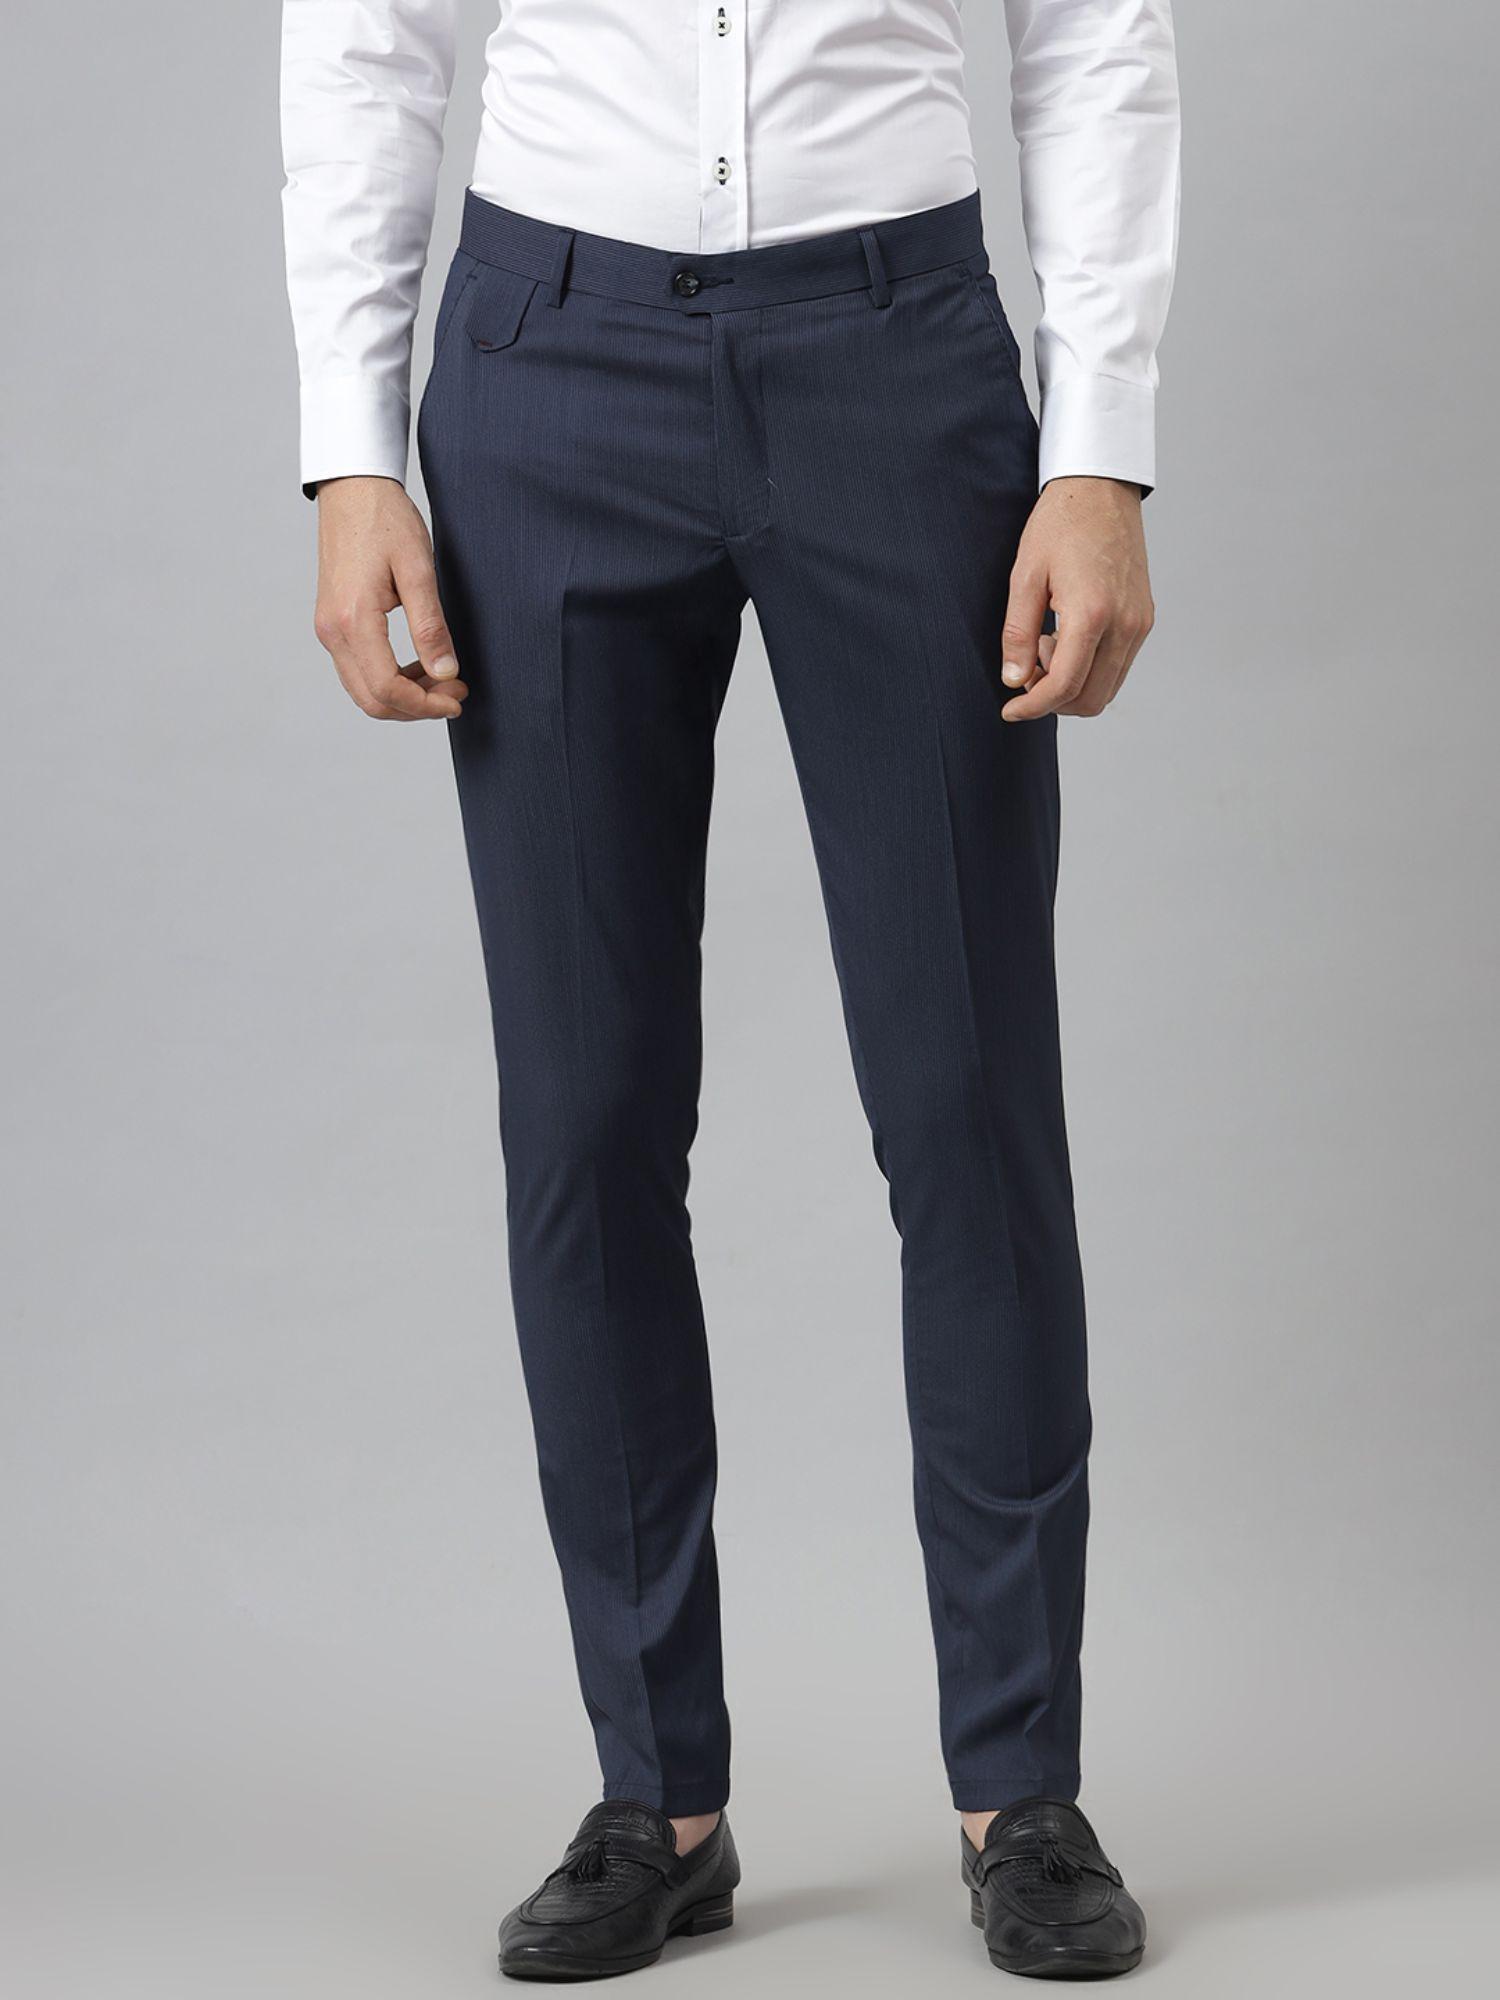 Blue Viscose Rayon Solid Formal Trouser